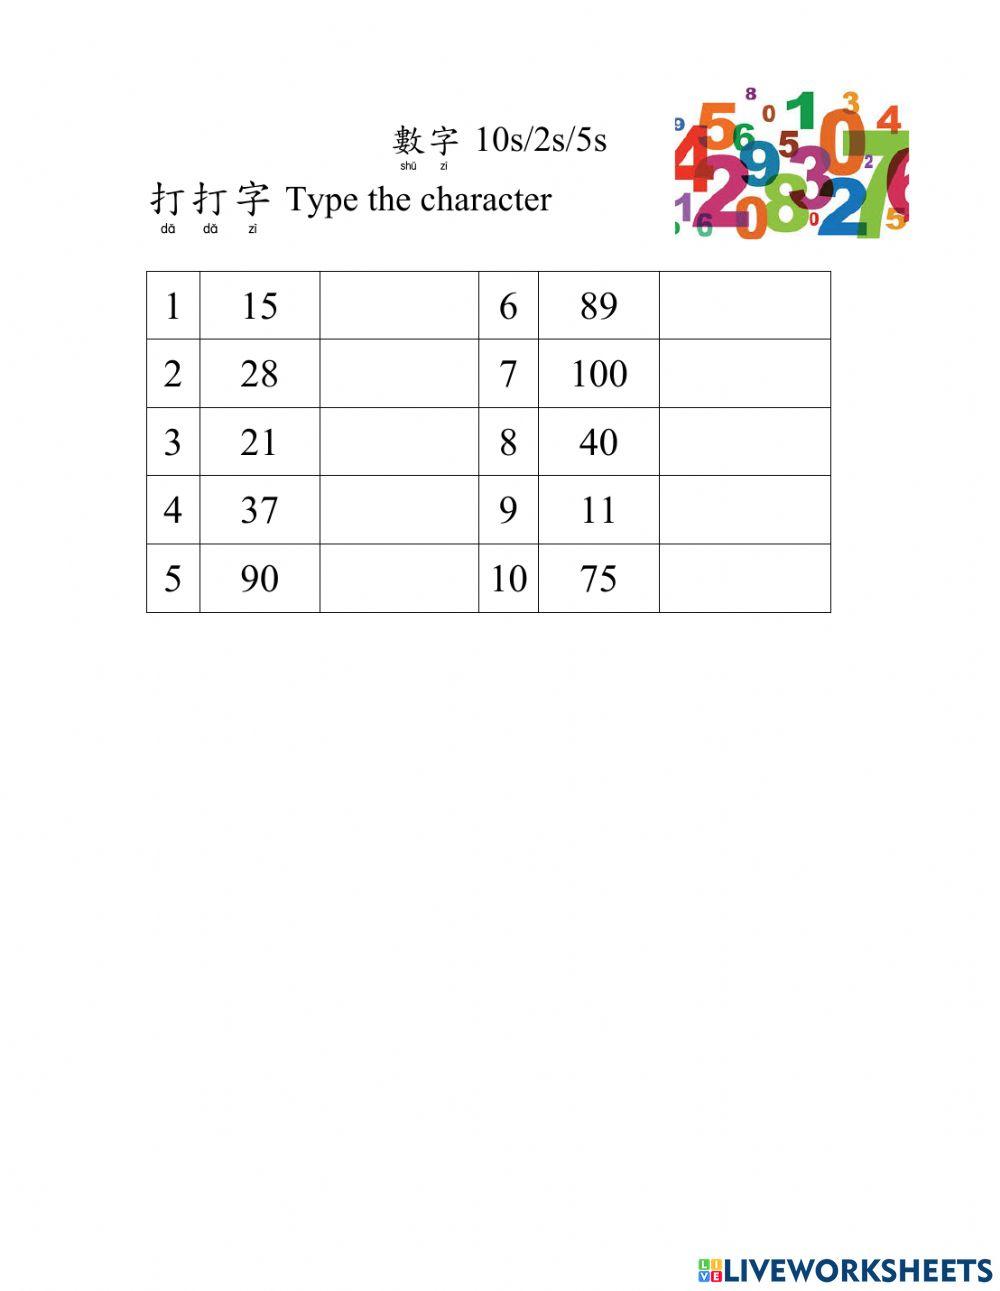 Number-character 4